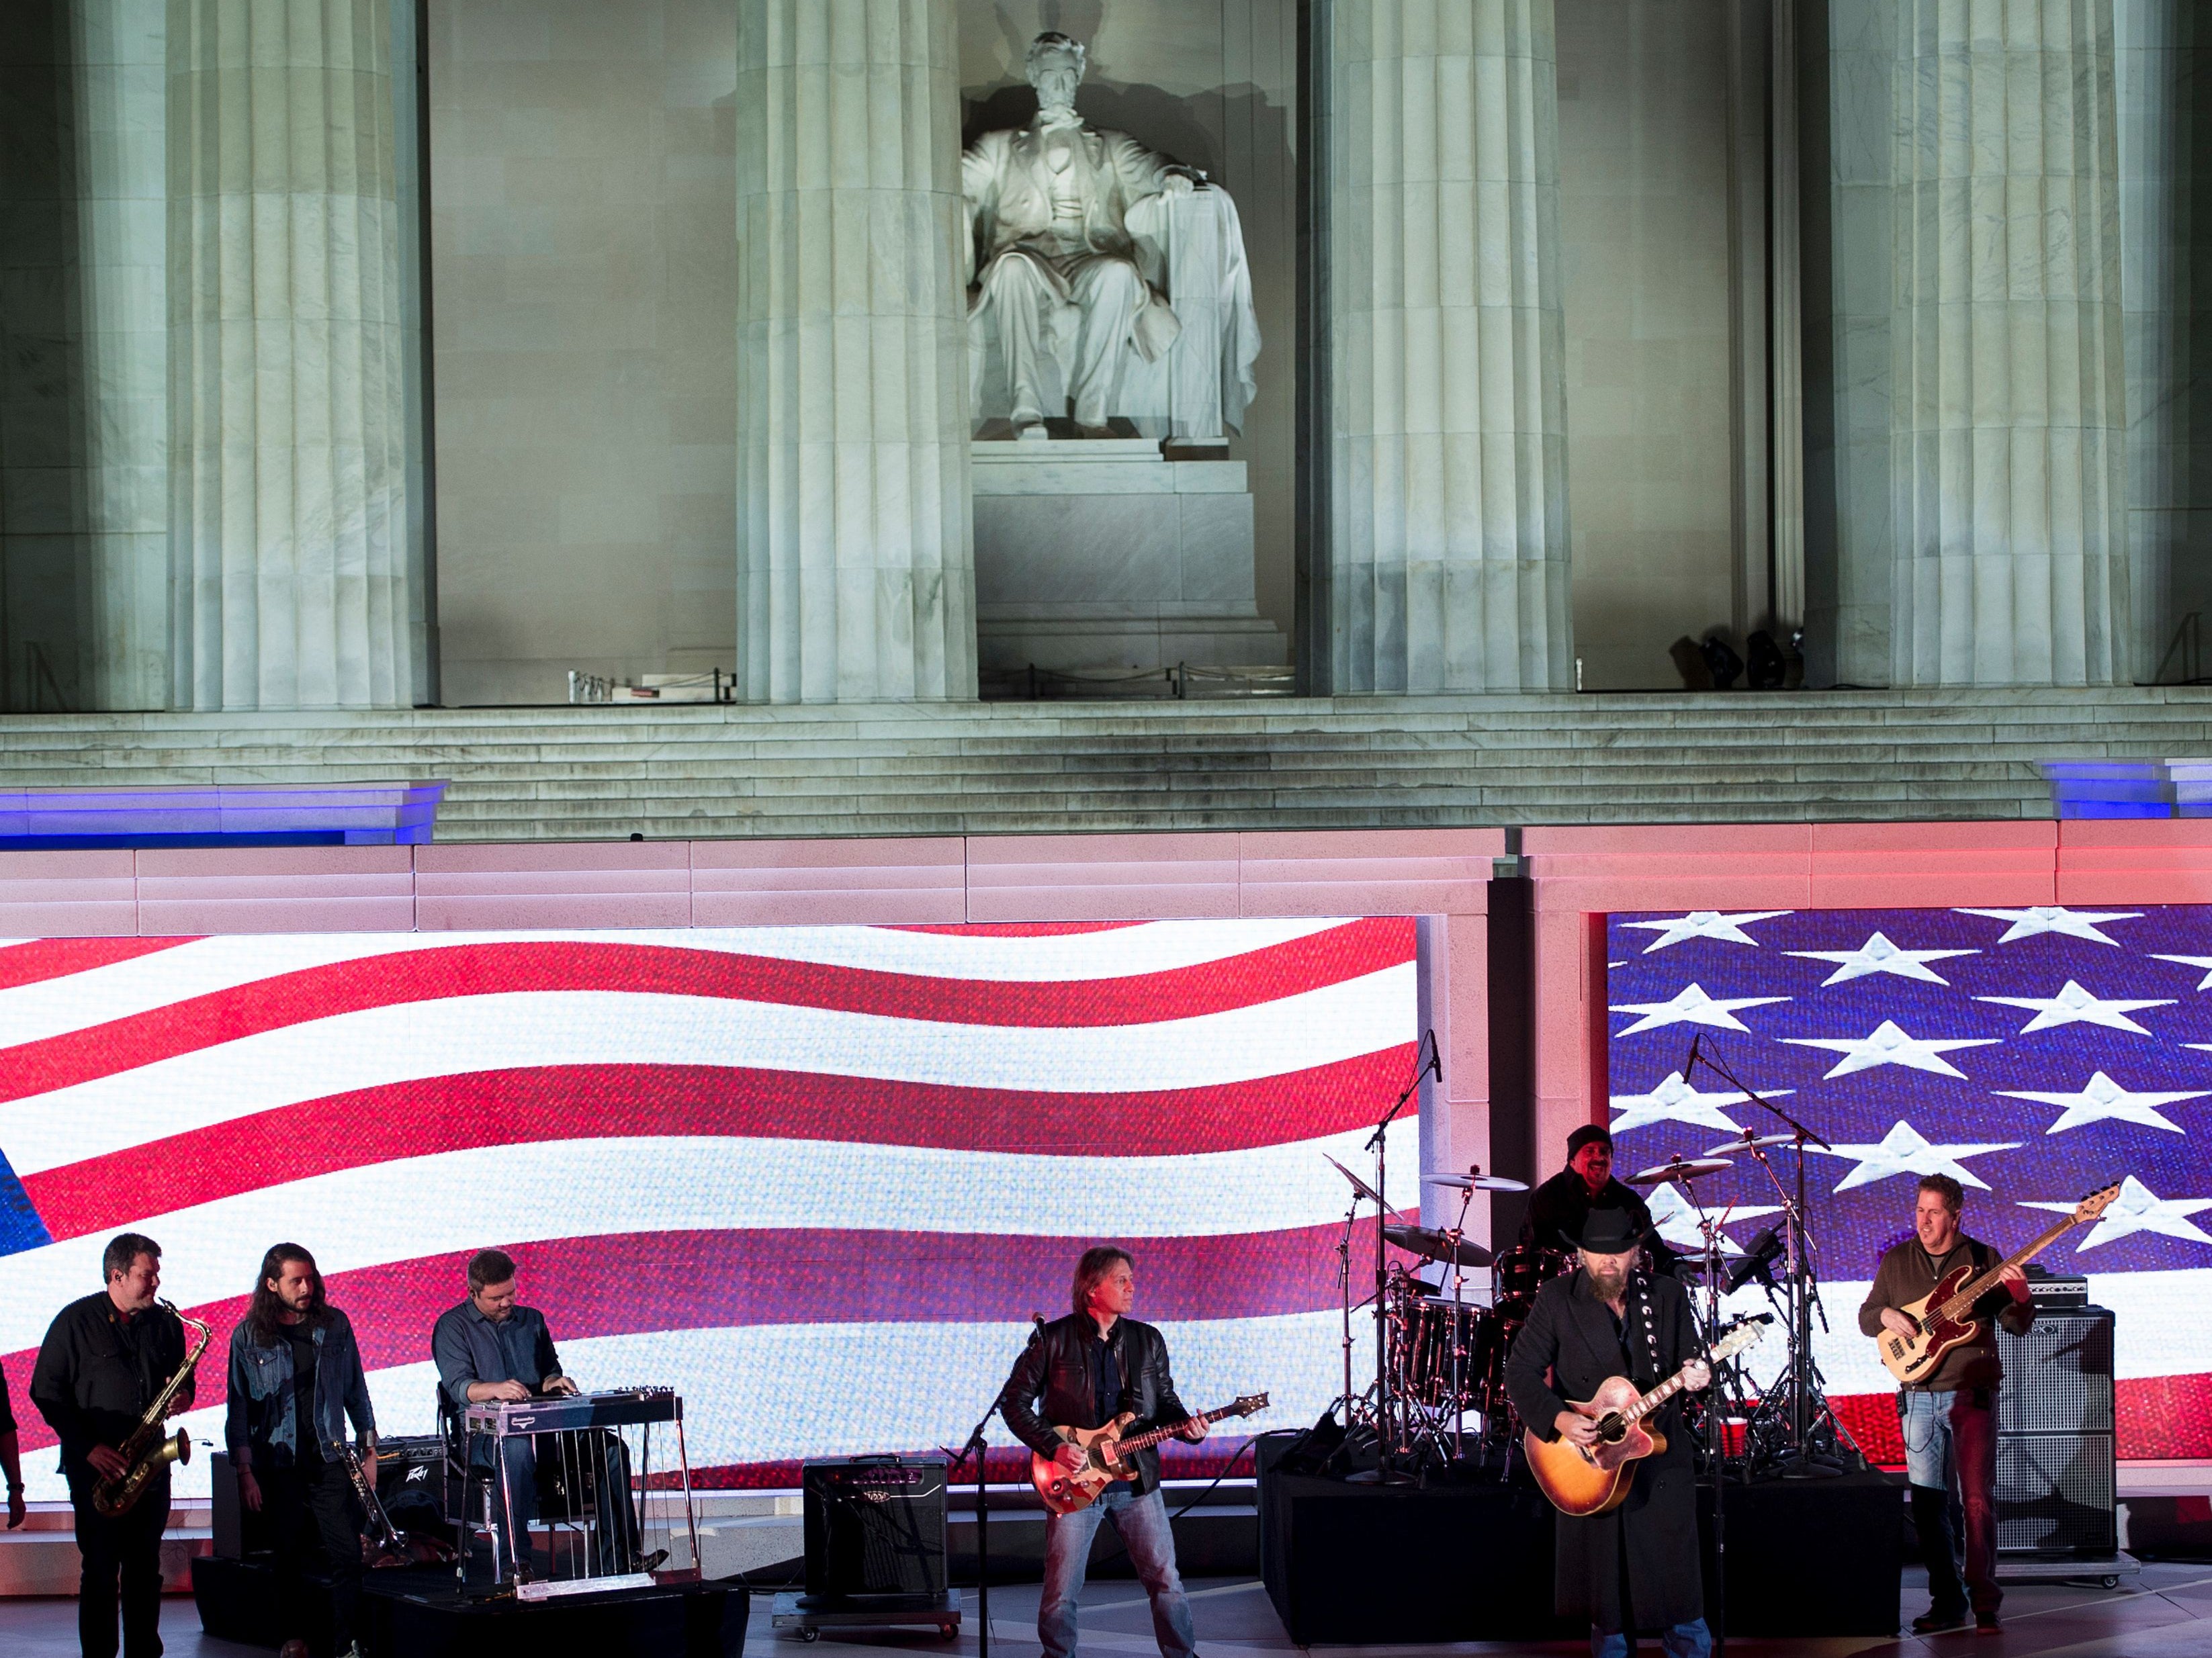 Toby Keith performing at a welcome celebration for US President-elect Donald Trump in 2017